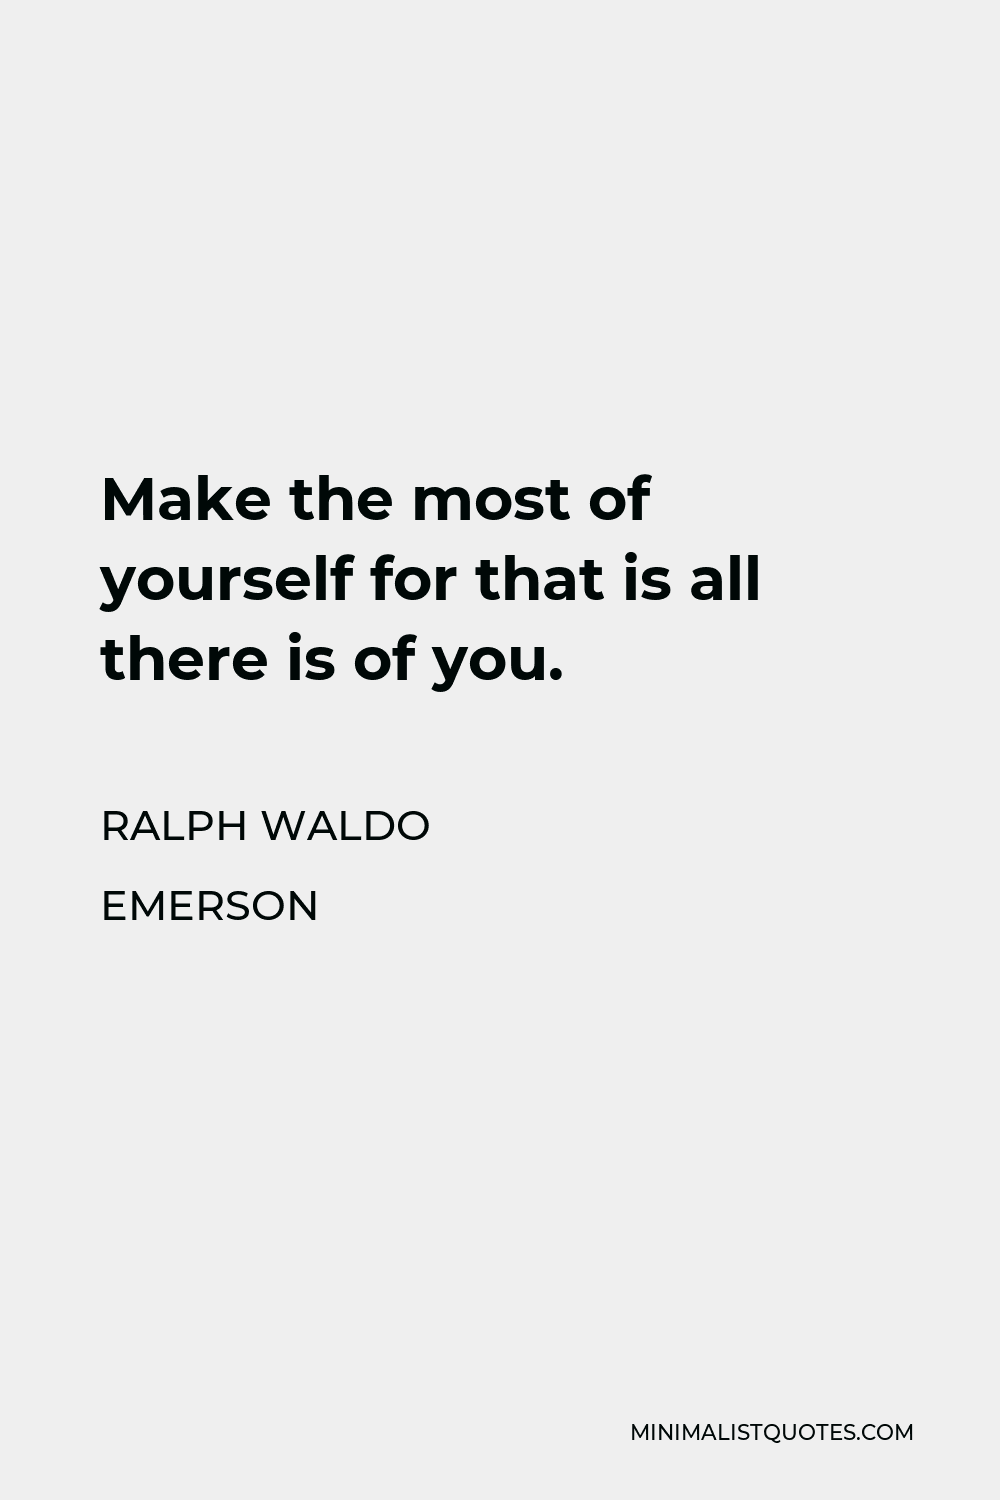 Ralph Waldo Emerson Quote - Make the most of yourself for that is all there is of you.